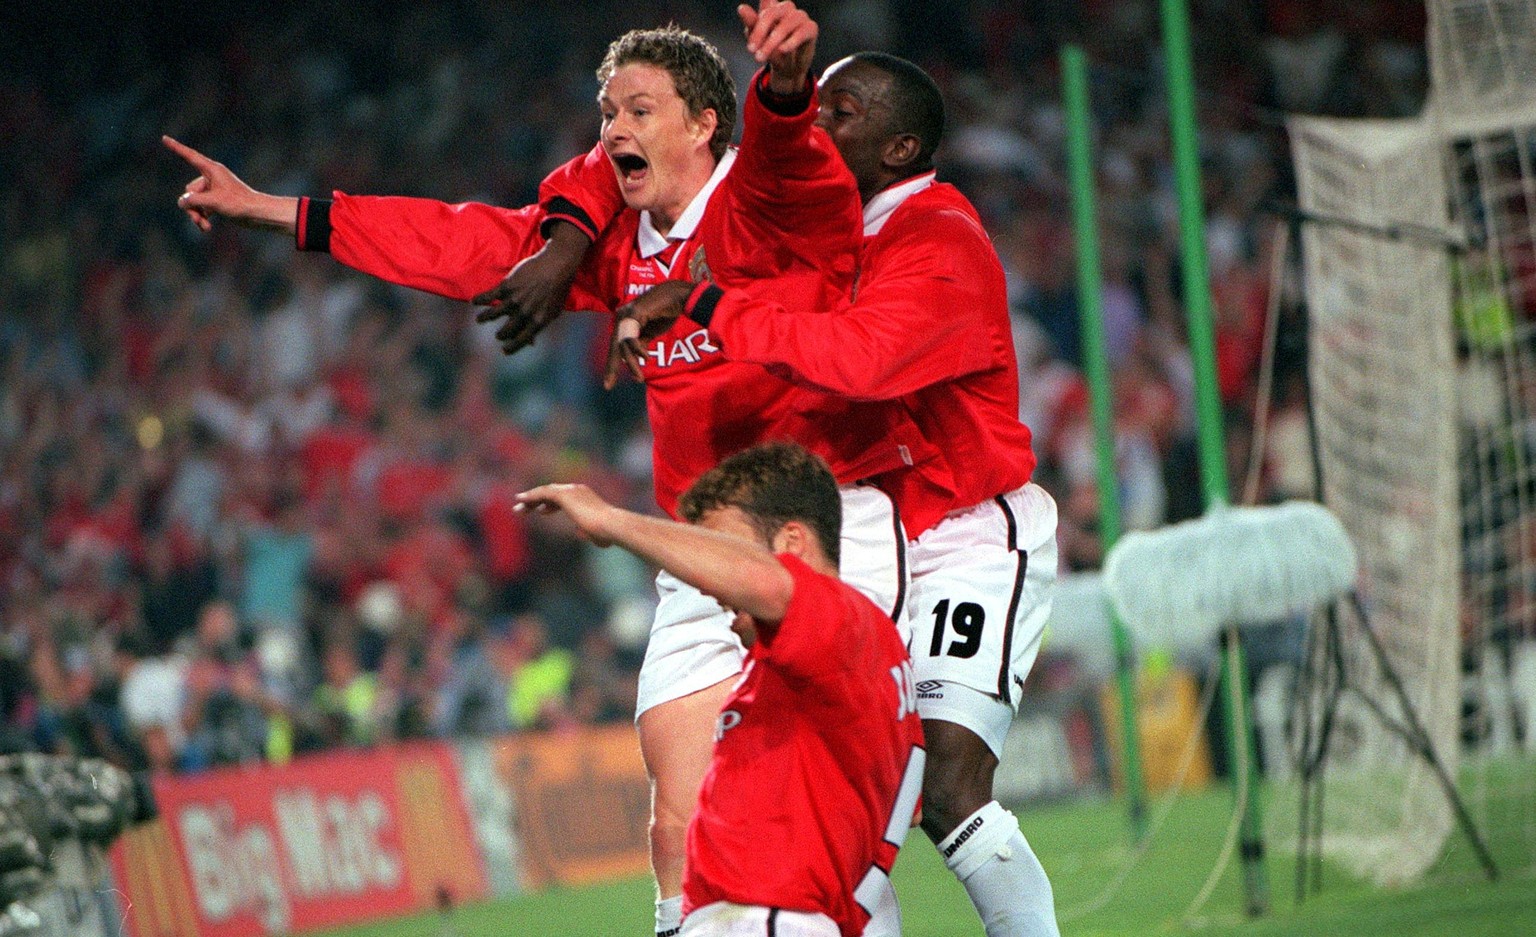 26th MAY 1999, UEFA Champions League Final, Barcelona, Spain, Manchester United 2 v Bayern Munich 1, Manchester United&#039;s Ole Gunnar Solkskjaer ecstatic after scoring the winning goal deep into in ...